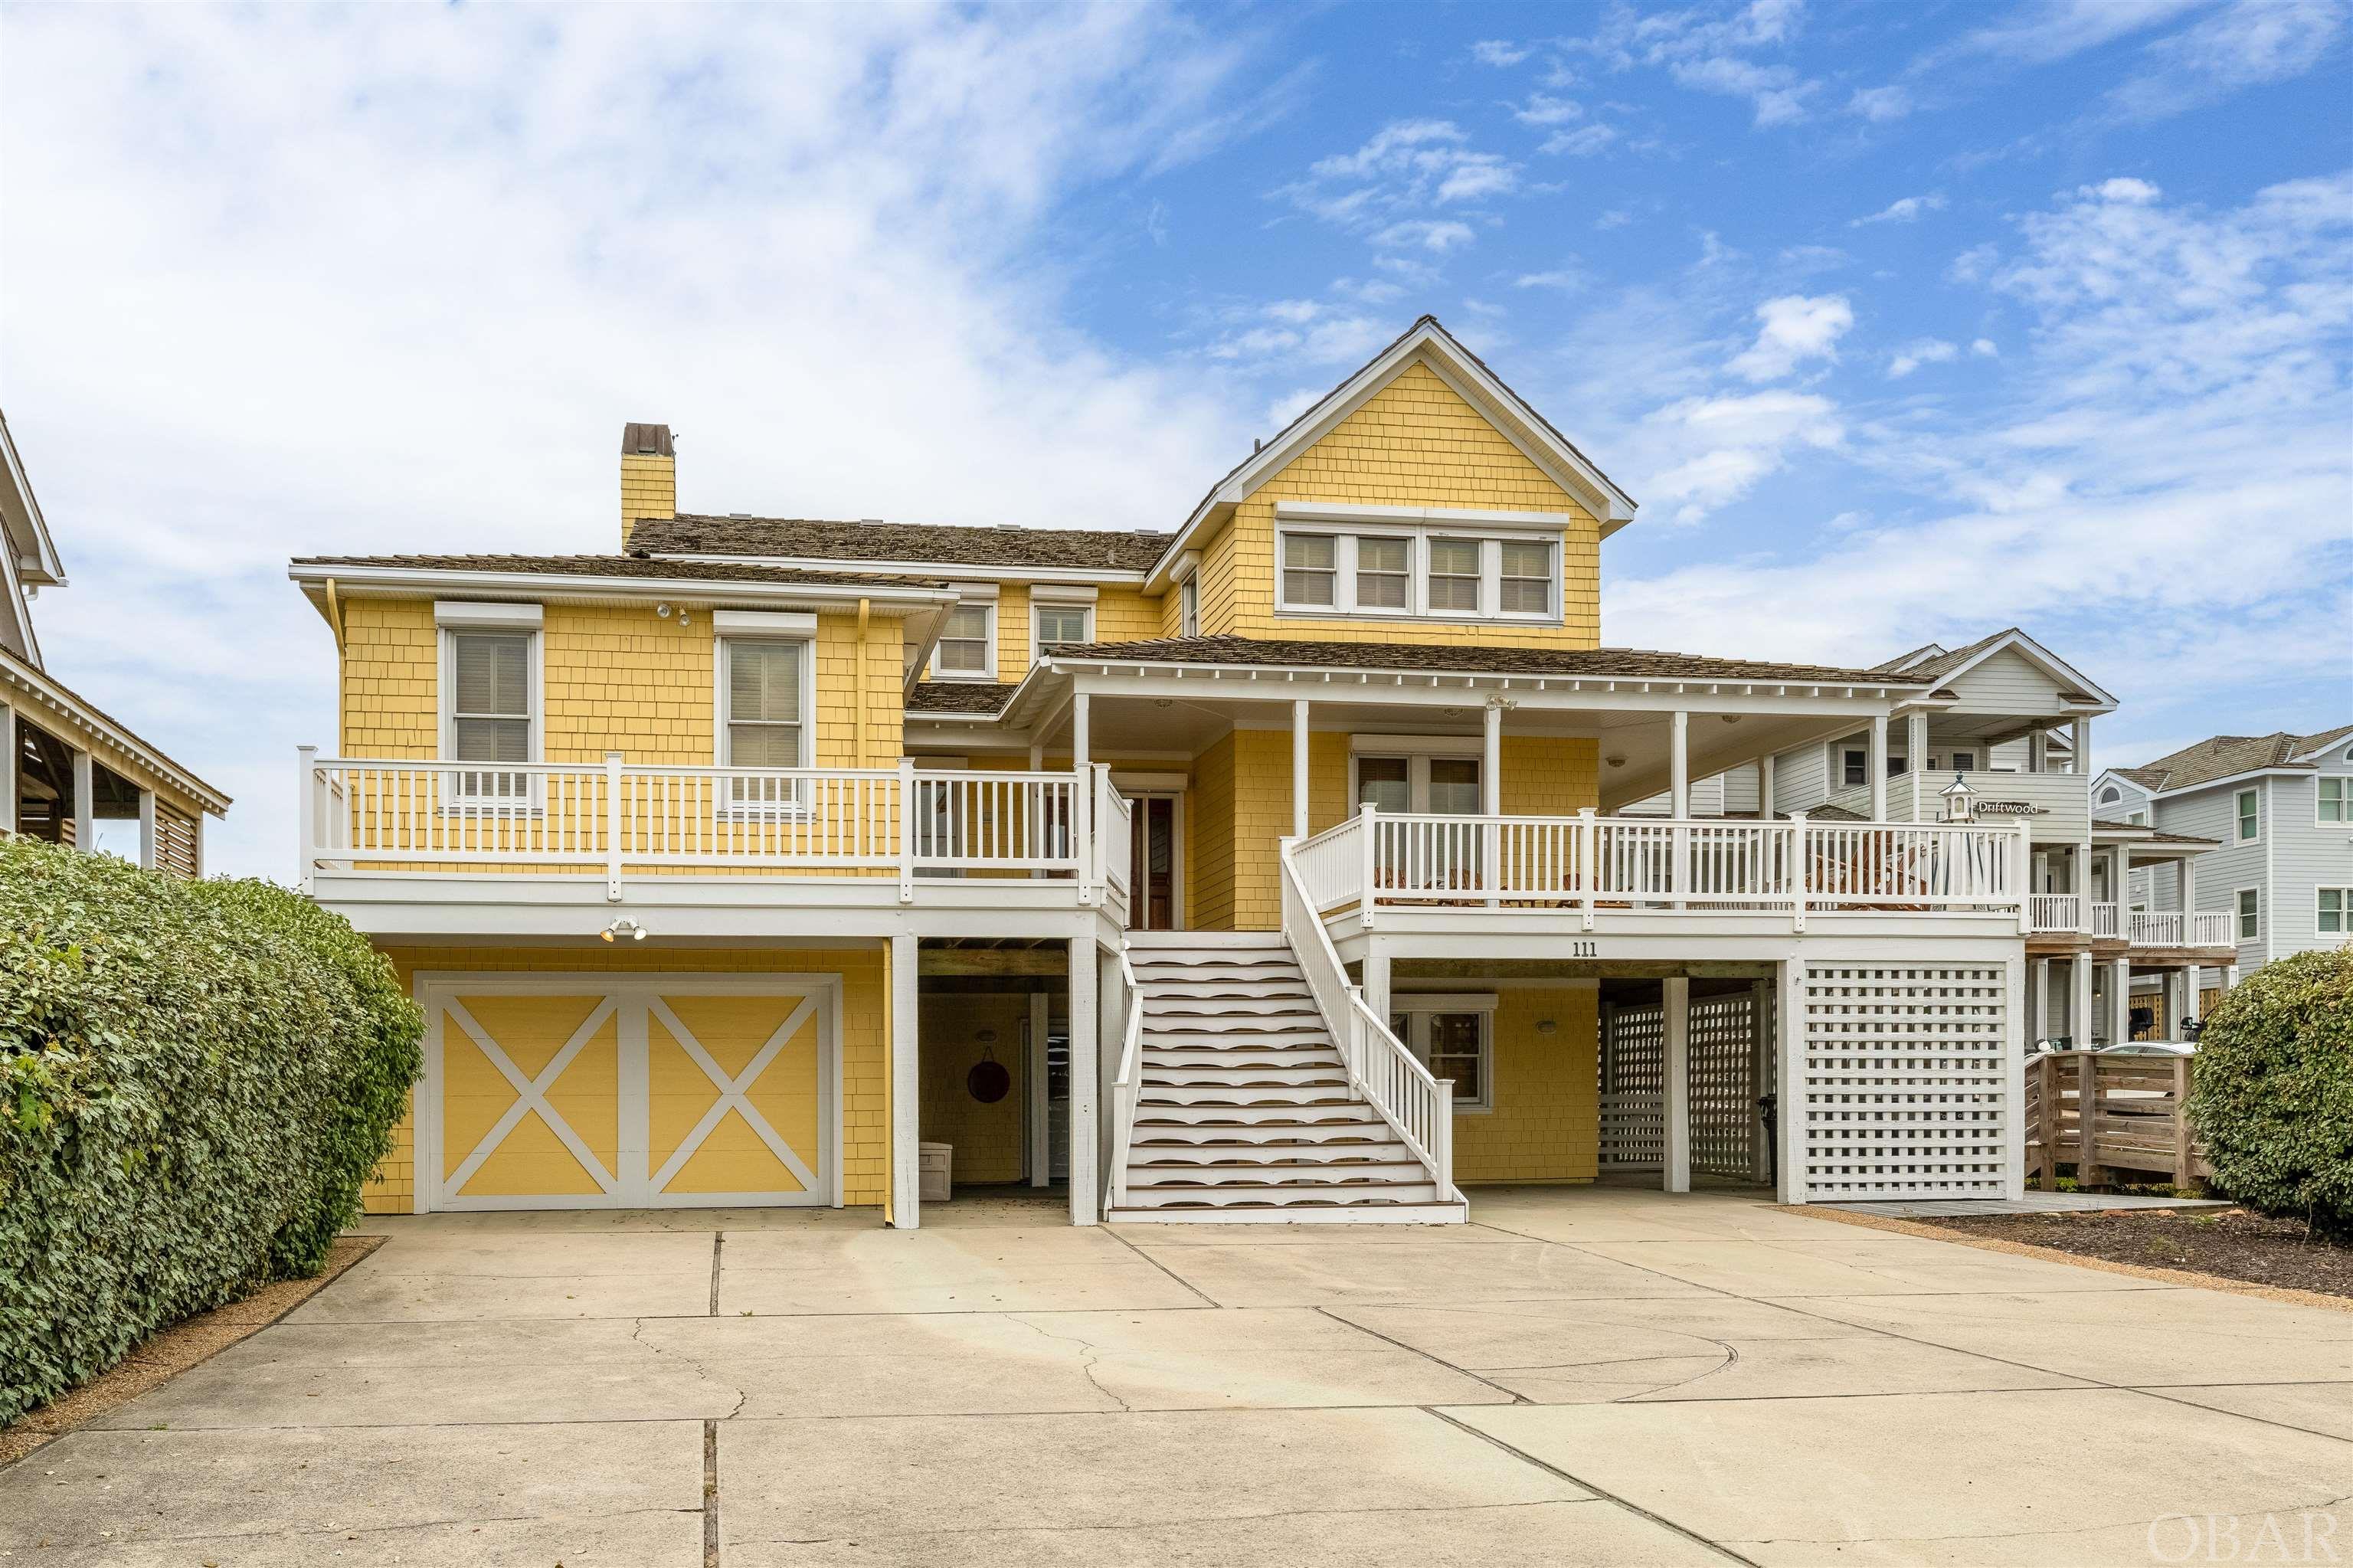 111 Sea Holly Court, Nags Head, NC 27959, 6 Bedrooms Bedrooms, ,4 BathroomsBathrooms,Residential,For sale,Sea Holly Court,125460